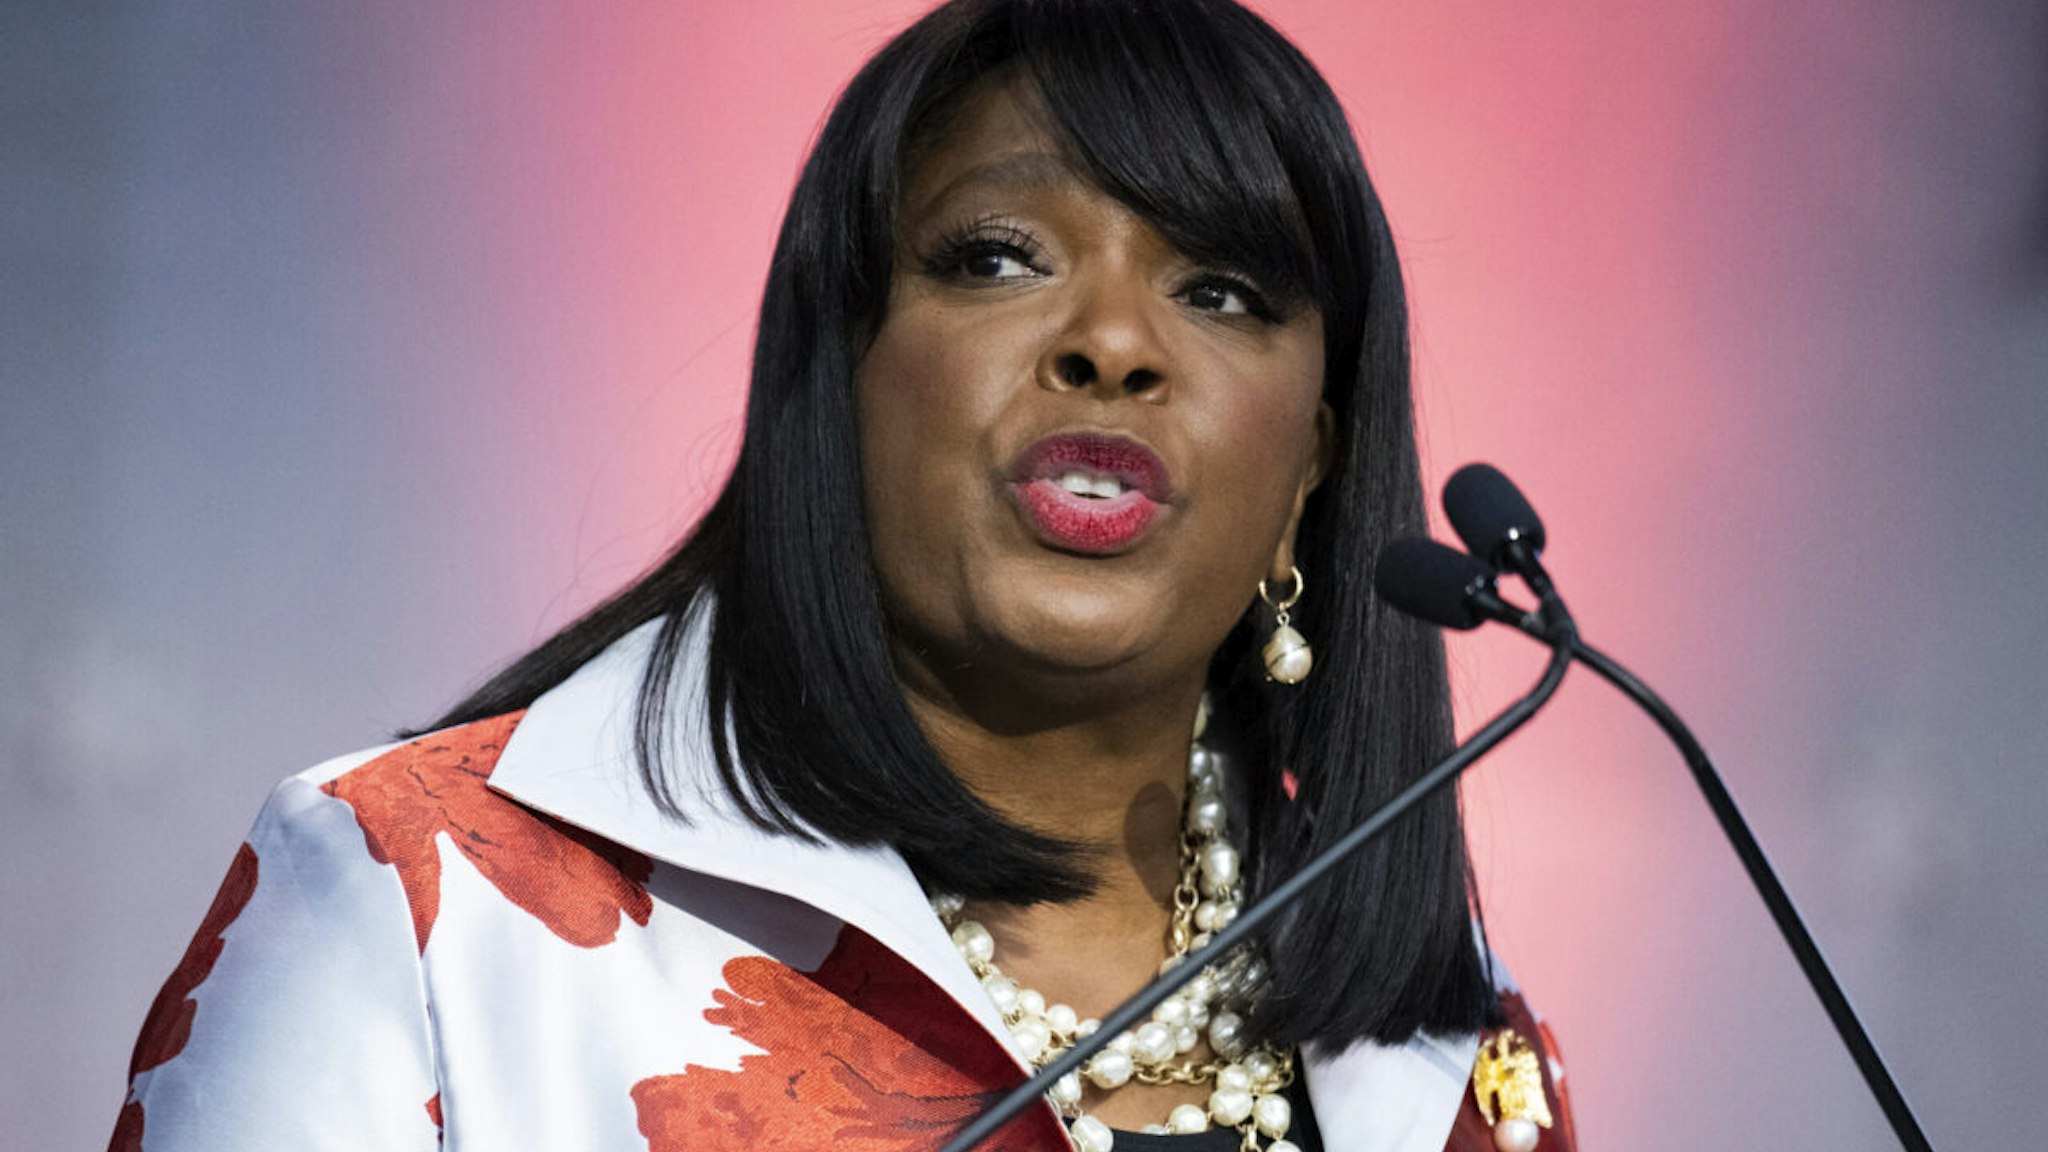 Rep.Terri Sewell, D-Ala., speaks at the Congressional Black Caucus Foundations 51st Annual Legislative Conference titled "Advancing our Purpose, Elevating our Power," at the Walter E. Washington Convention Center, on Wednesday, September 28, 2022.